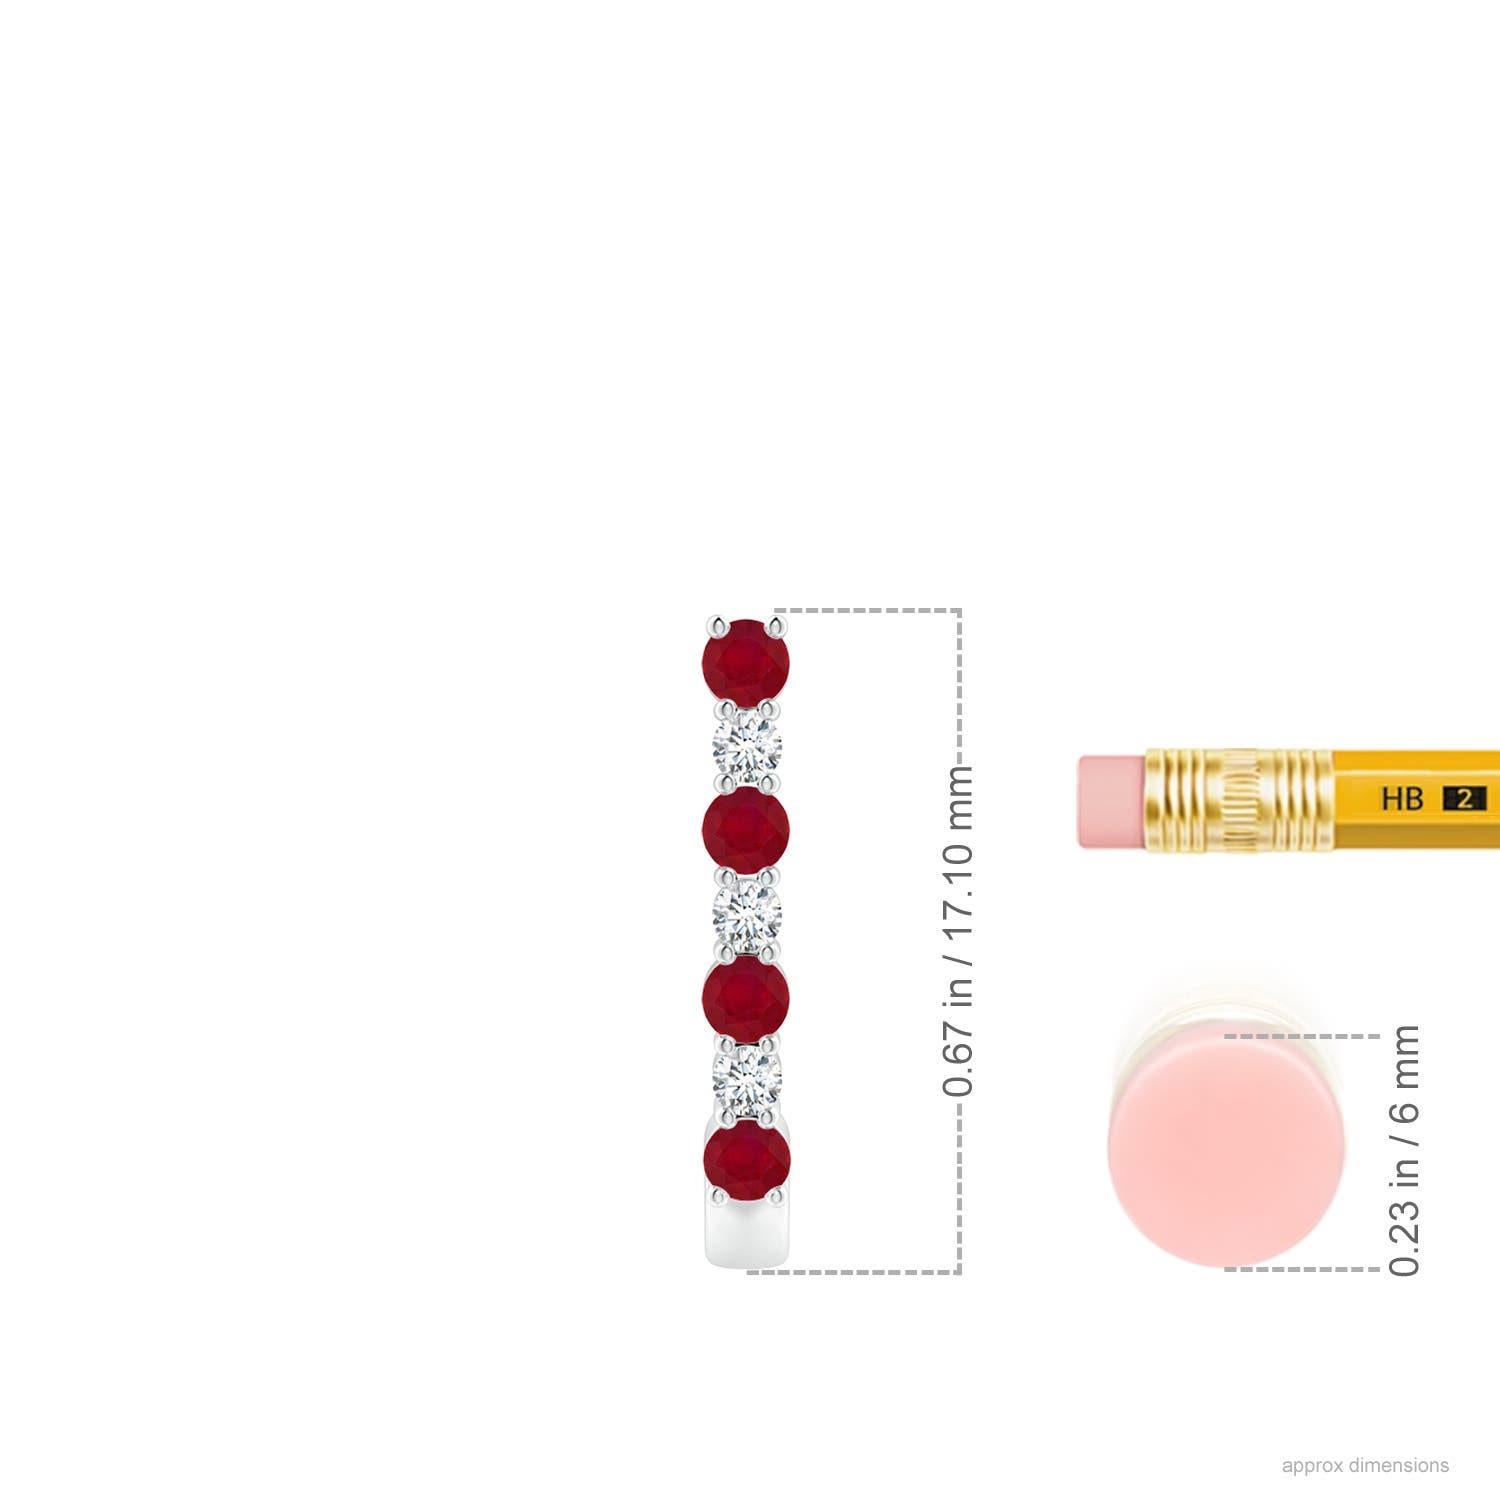 These stunning ruby and diamond hoop earrings are exquisitely crafted in 14k white gold. The J hoops are alternately studded with bright red rubies and sparkling diamonds for a captivating effect.
Ruby is the Birthstone for July and traditional gift